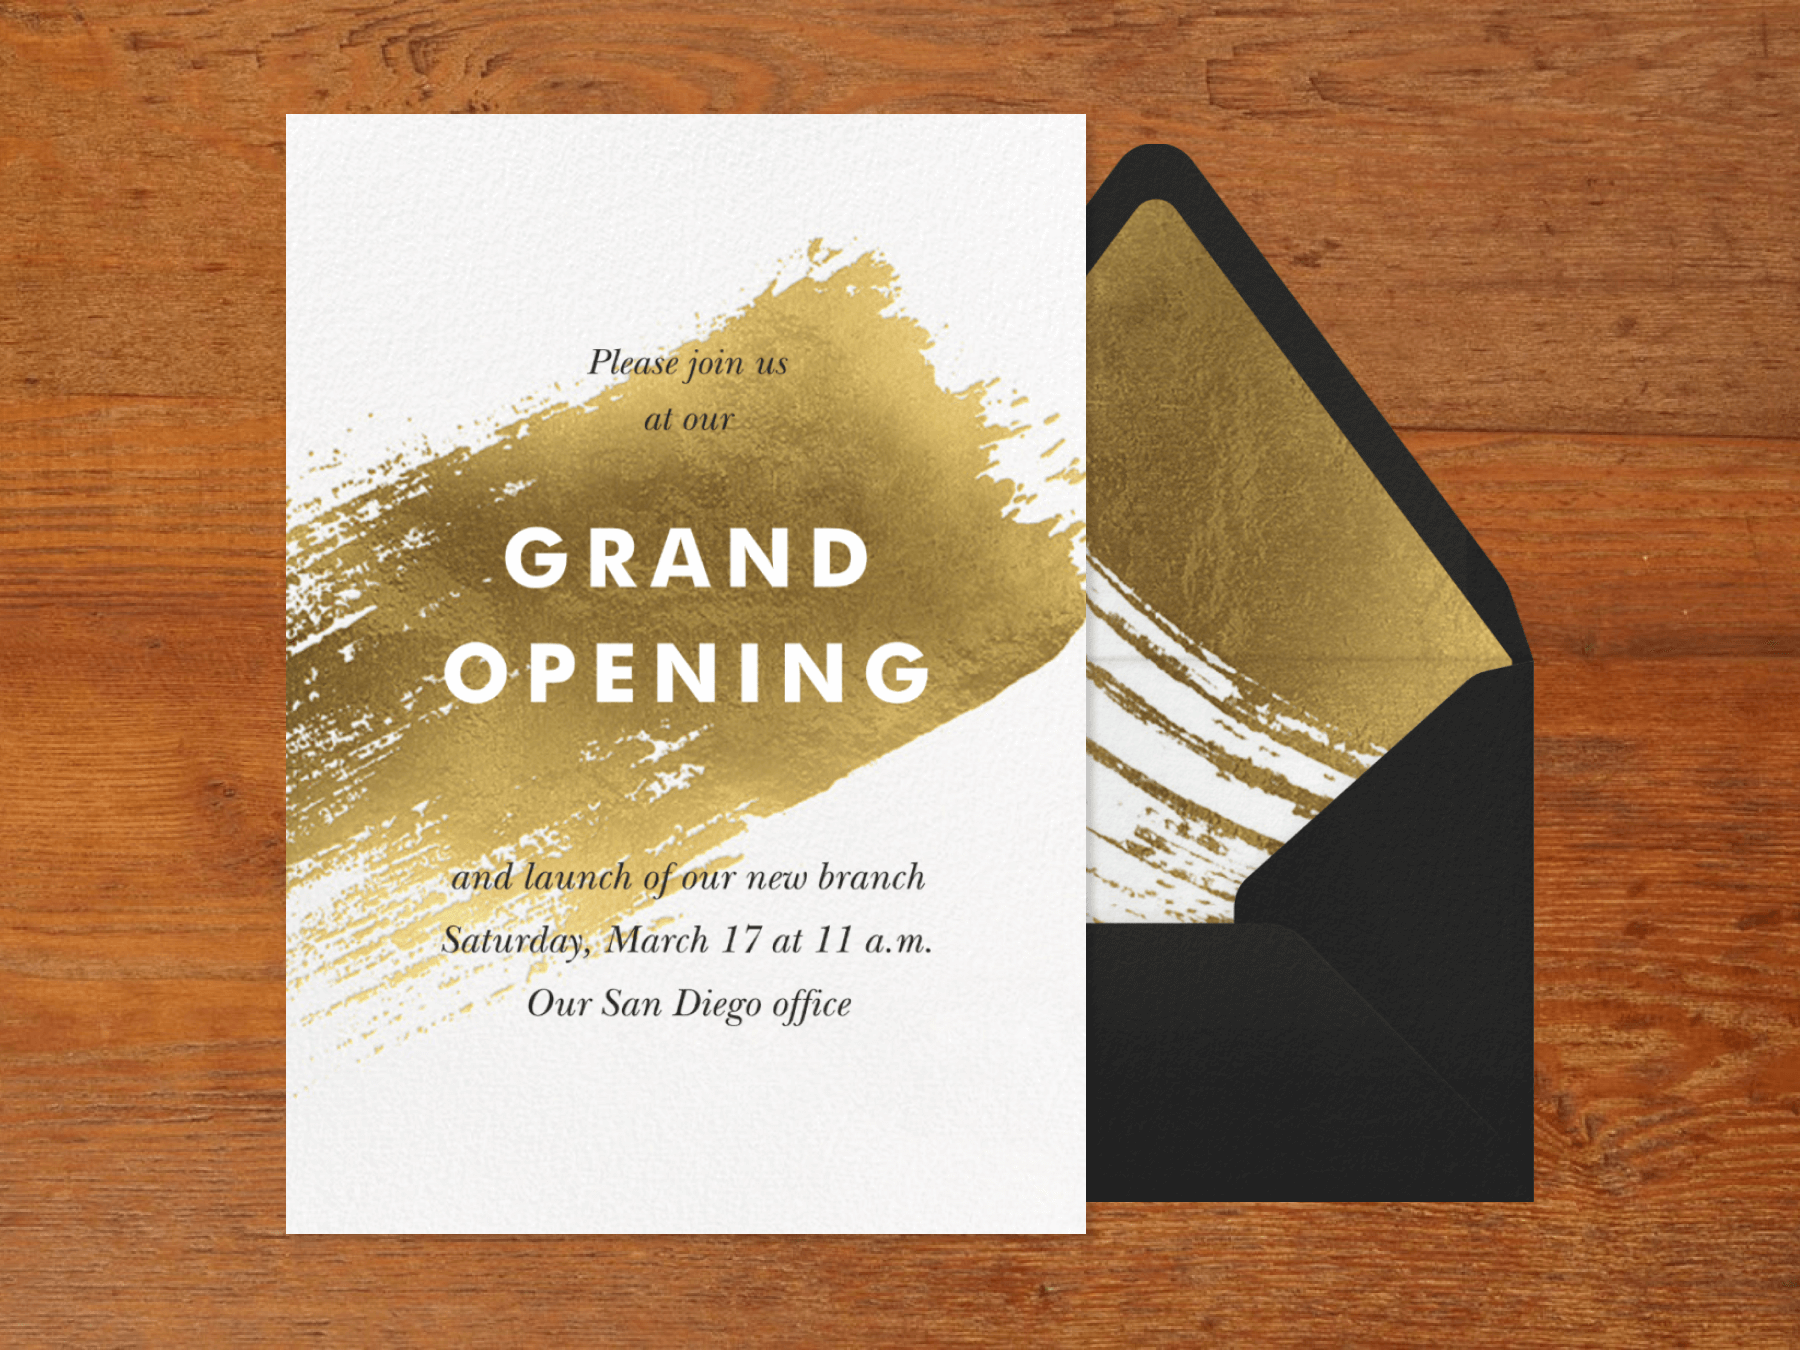 An invitation for a grand opening with a large gold brush stroke across the center.